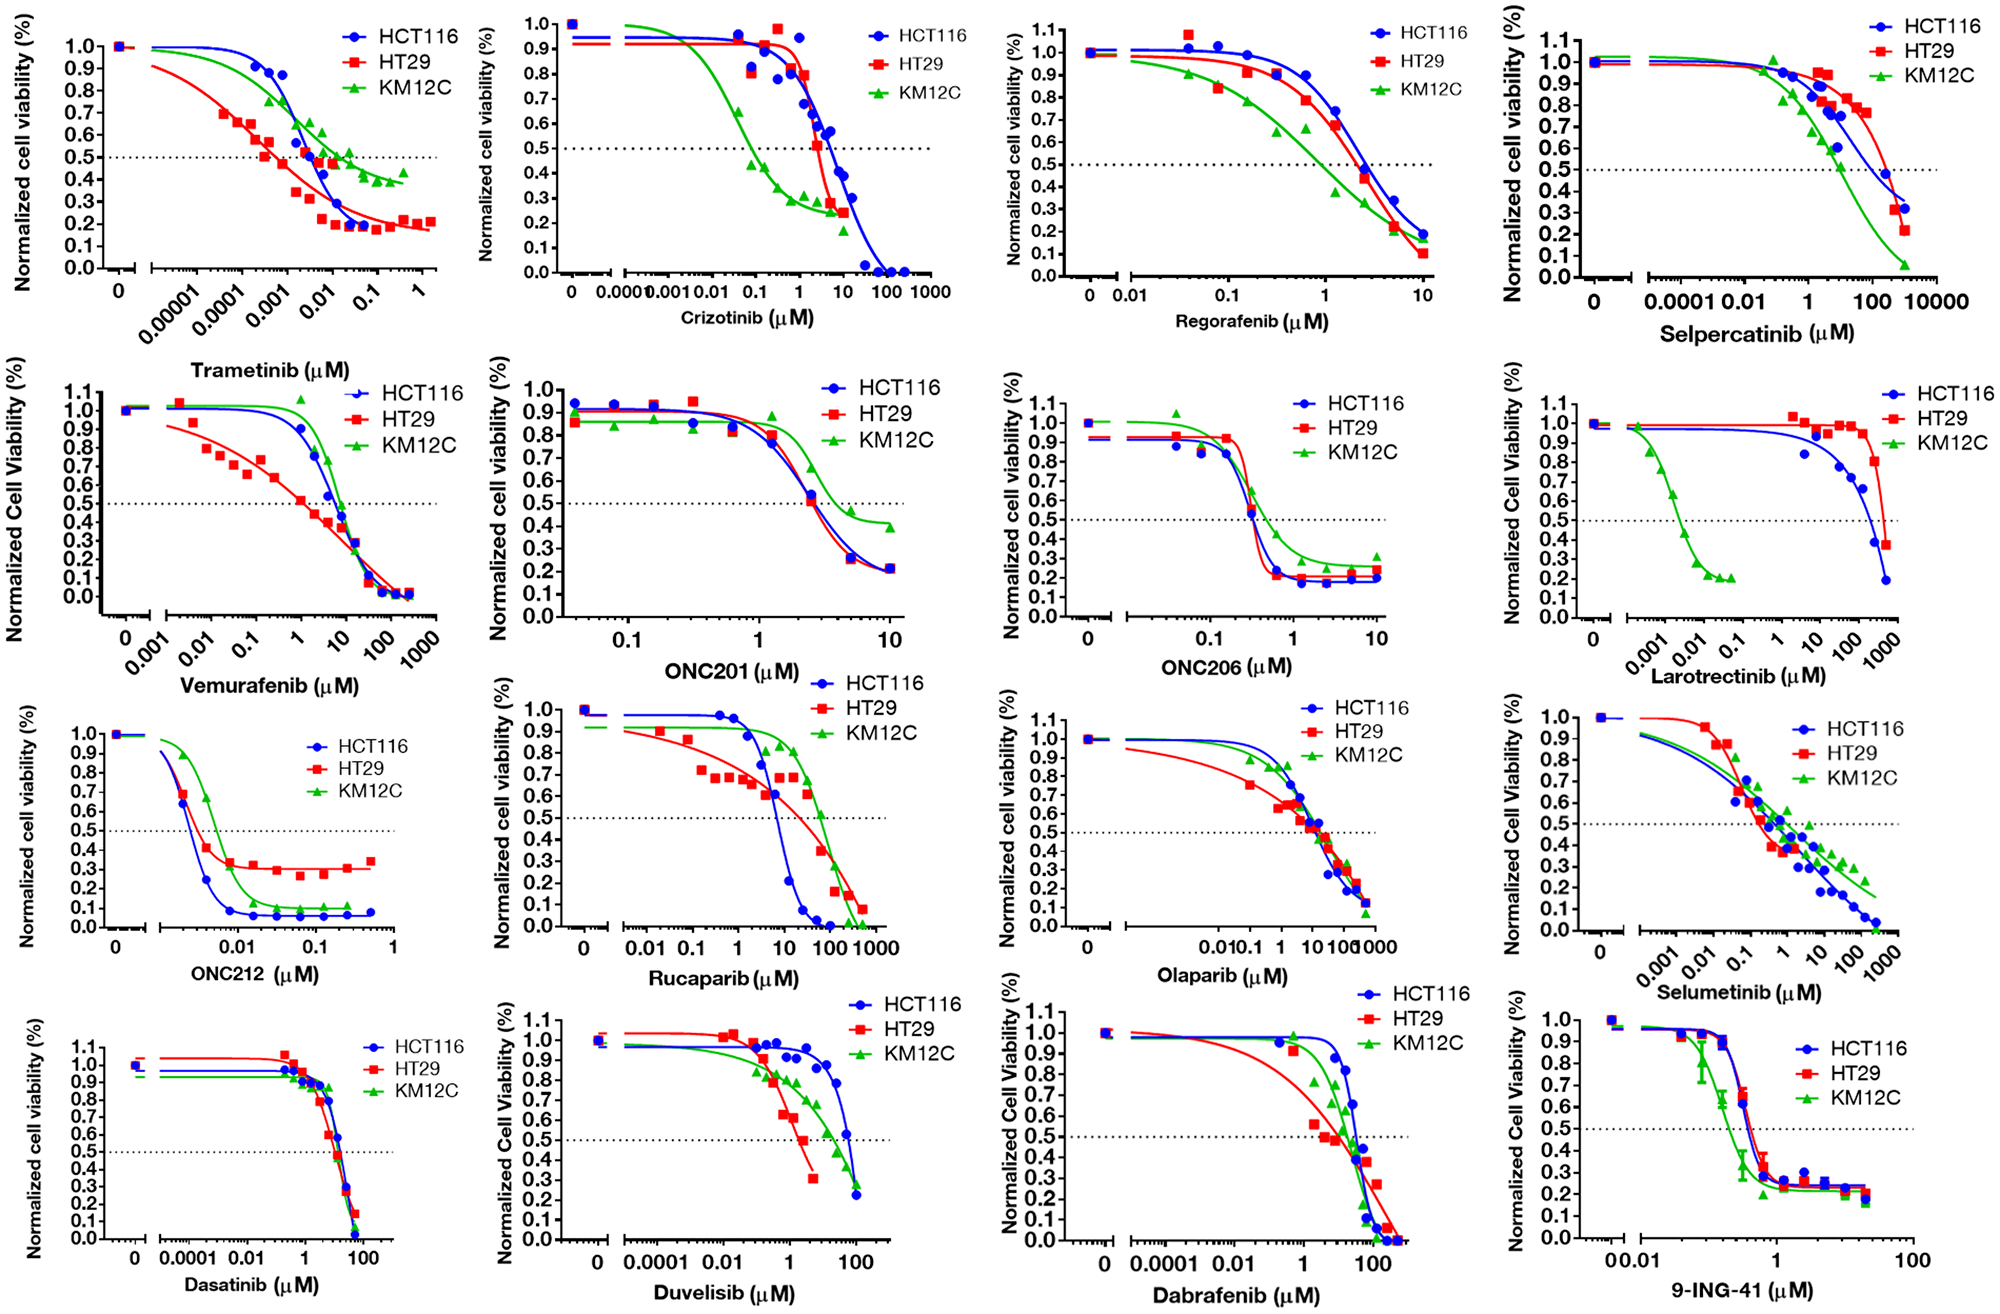 IC-50 curves for selected small-molecules in HCT-116, HT-29, and KM12C cell lines.